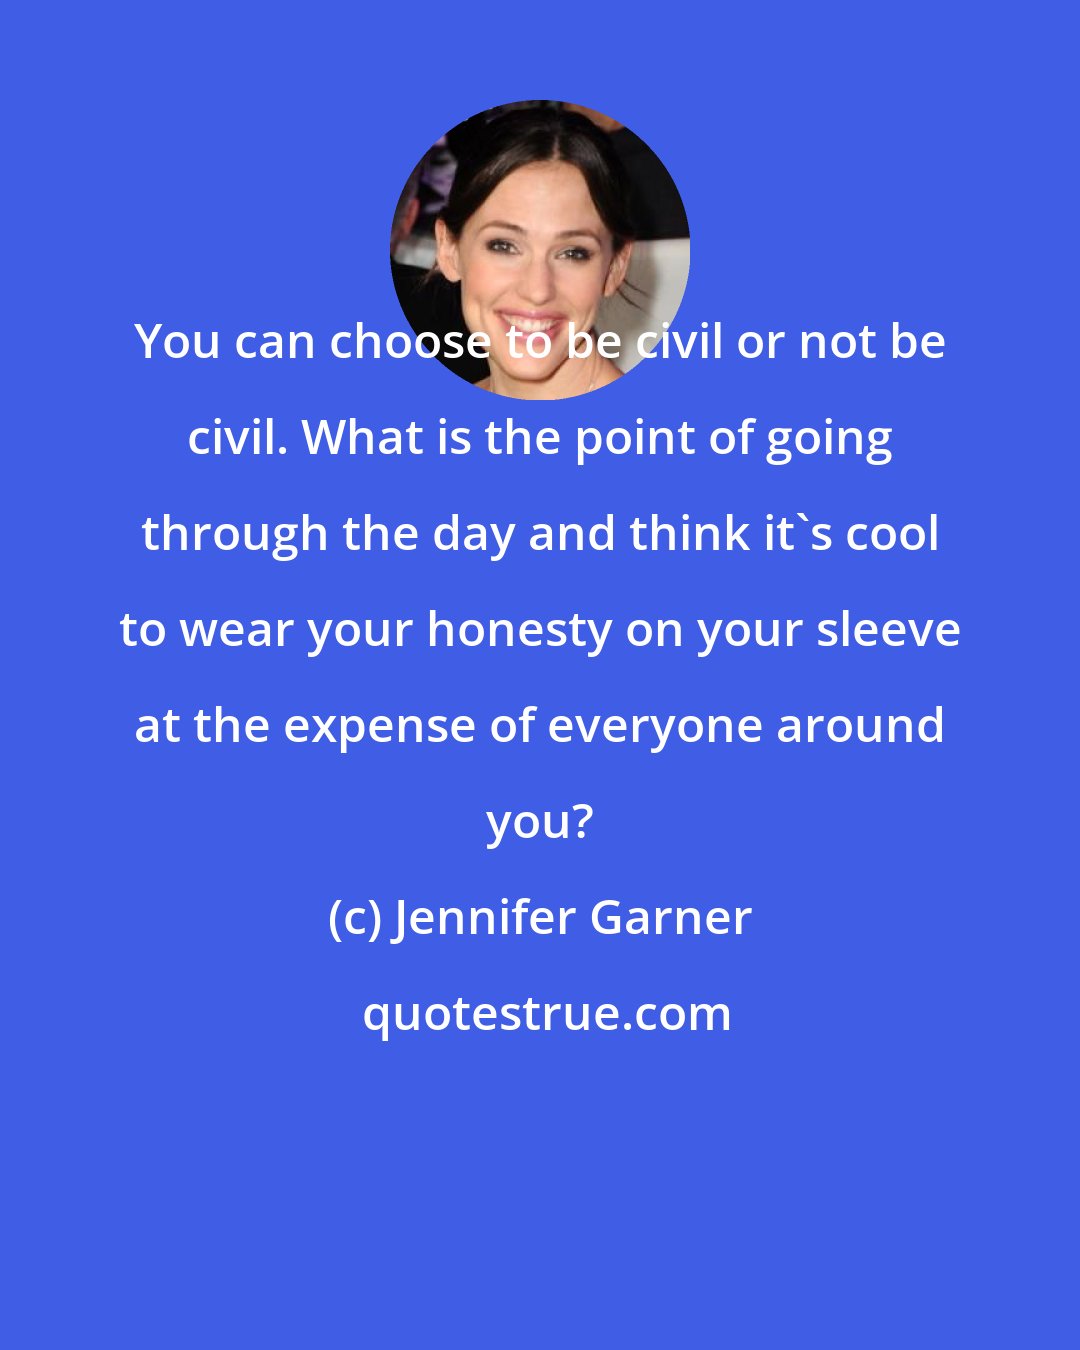 Jennifer Garner: You can choose to be civil or not be civil. What is the point of going through the day and think it's cool to wear your honesty on your sleeve at the expense of everyone around you?